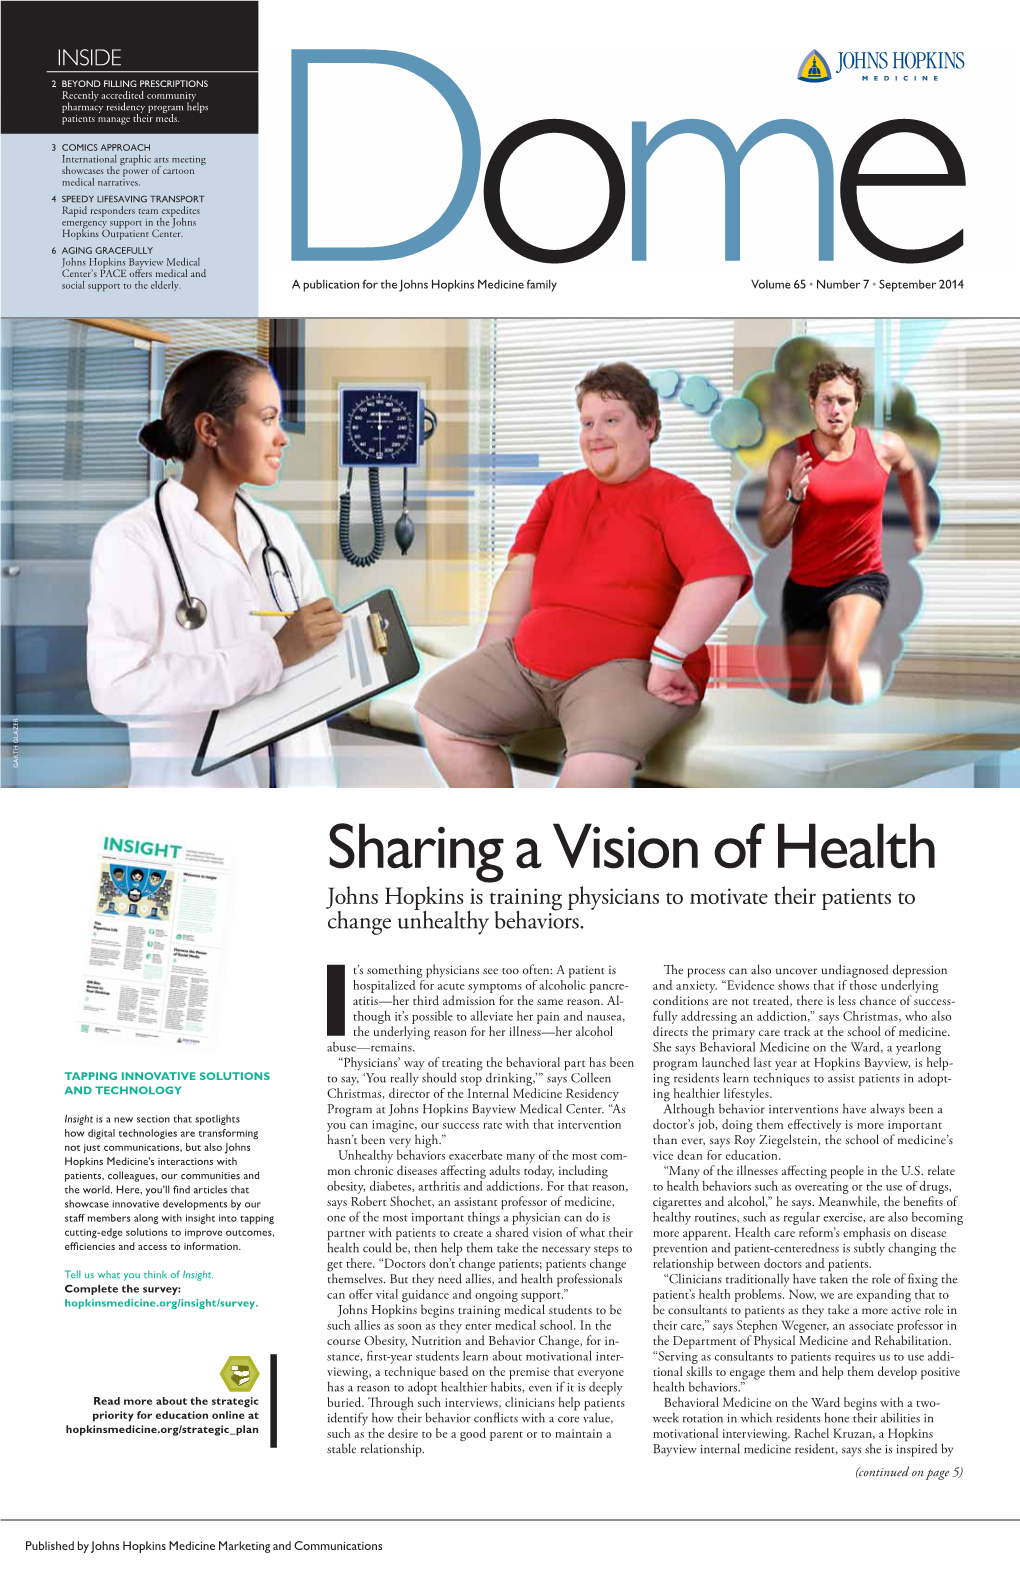 Sharing a Vision of Health Johns Hopkins Is Training Physicians to Motivate Their Patients to Change Unhealthy Behaviors